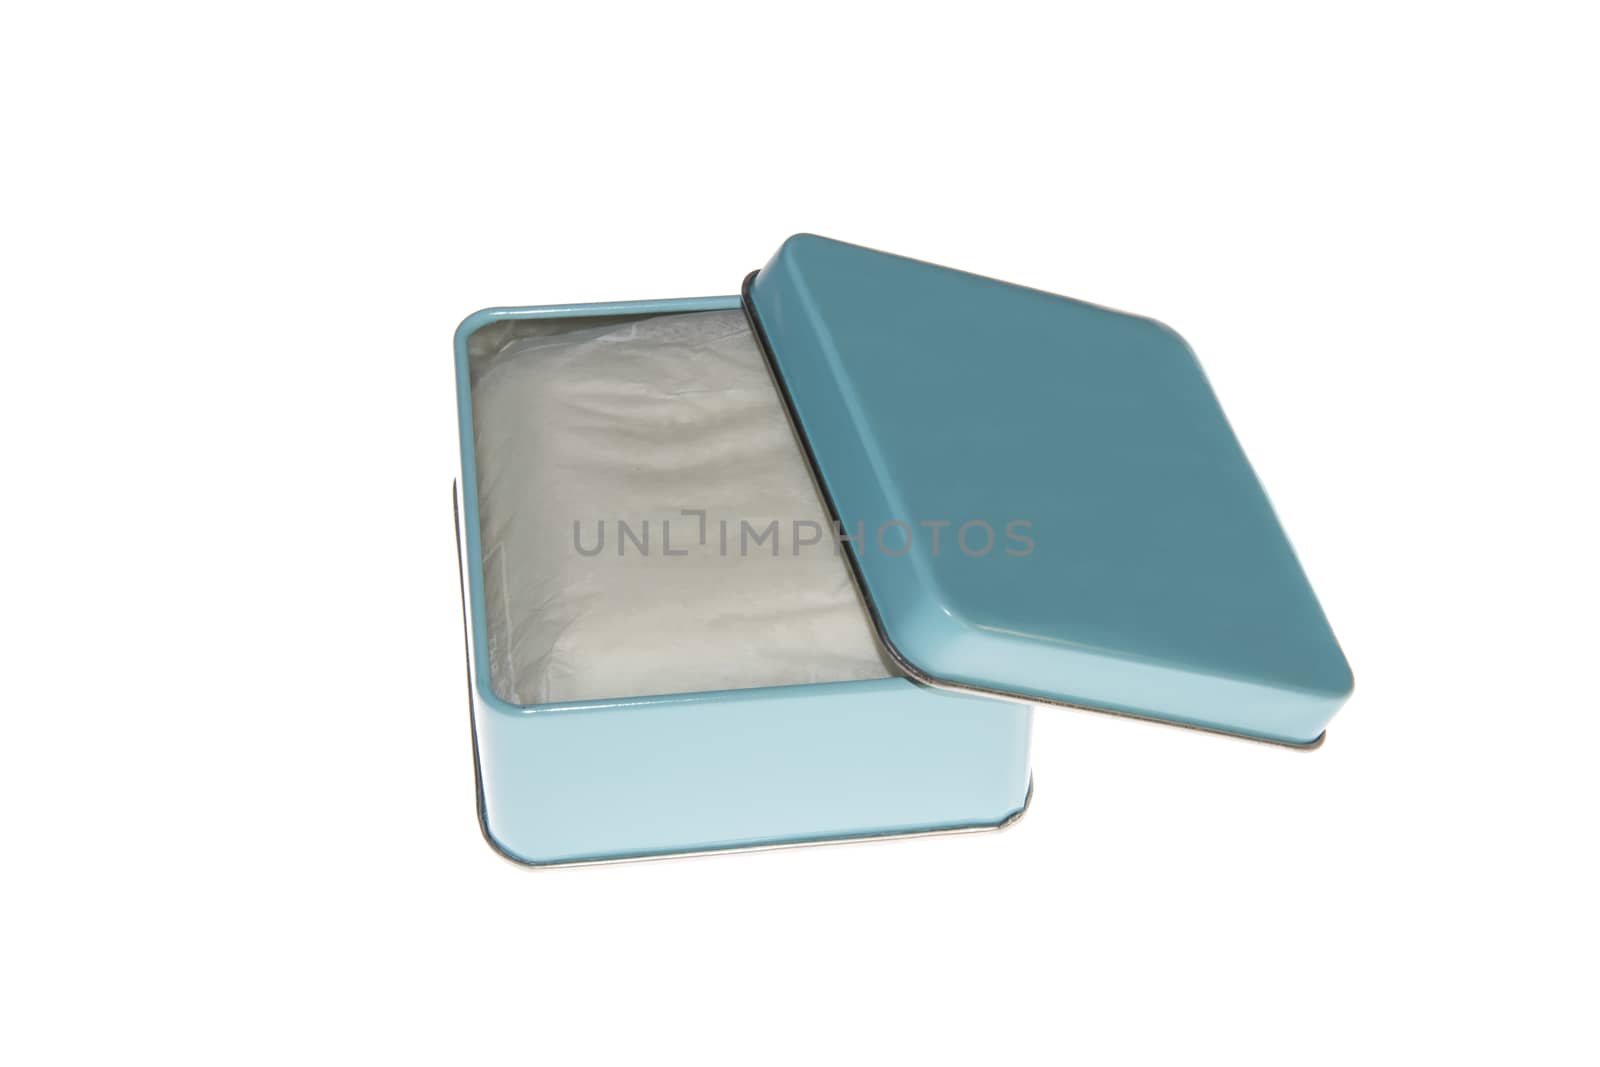 blue metal box with soap isolated over white background